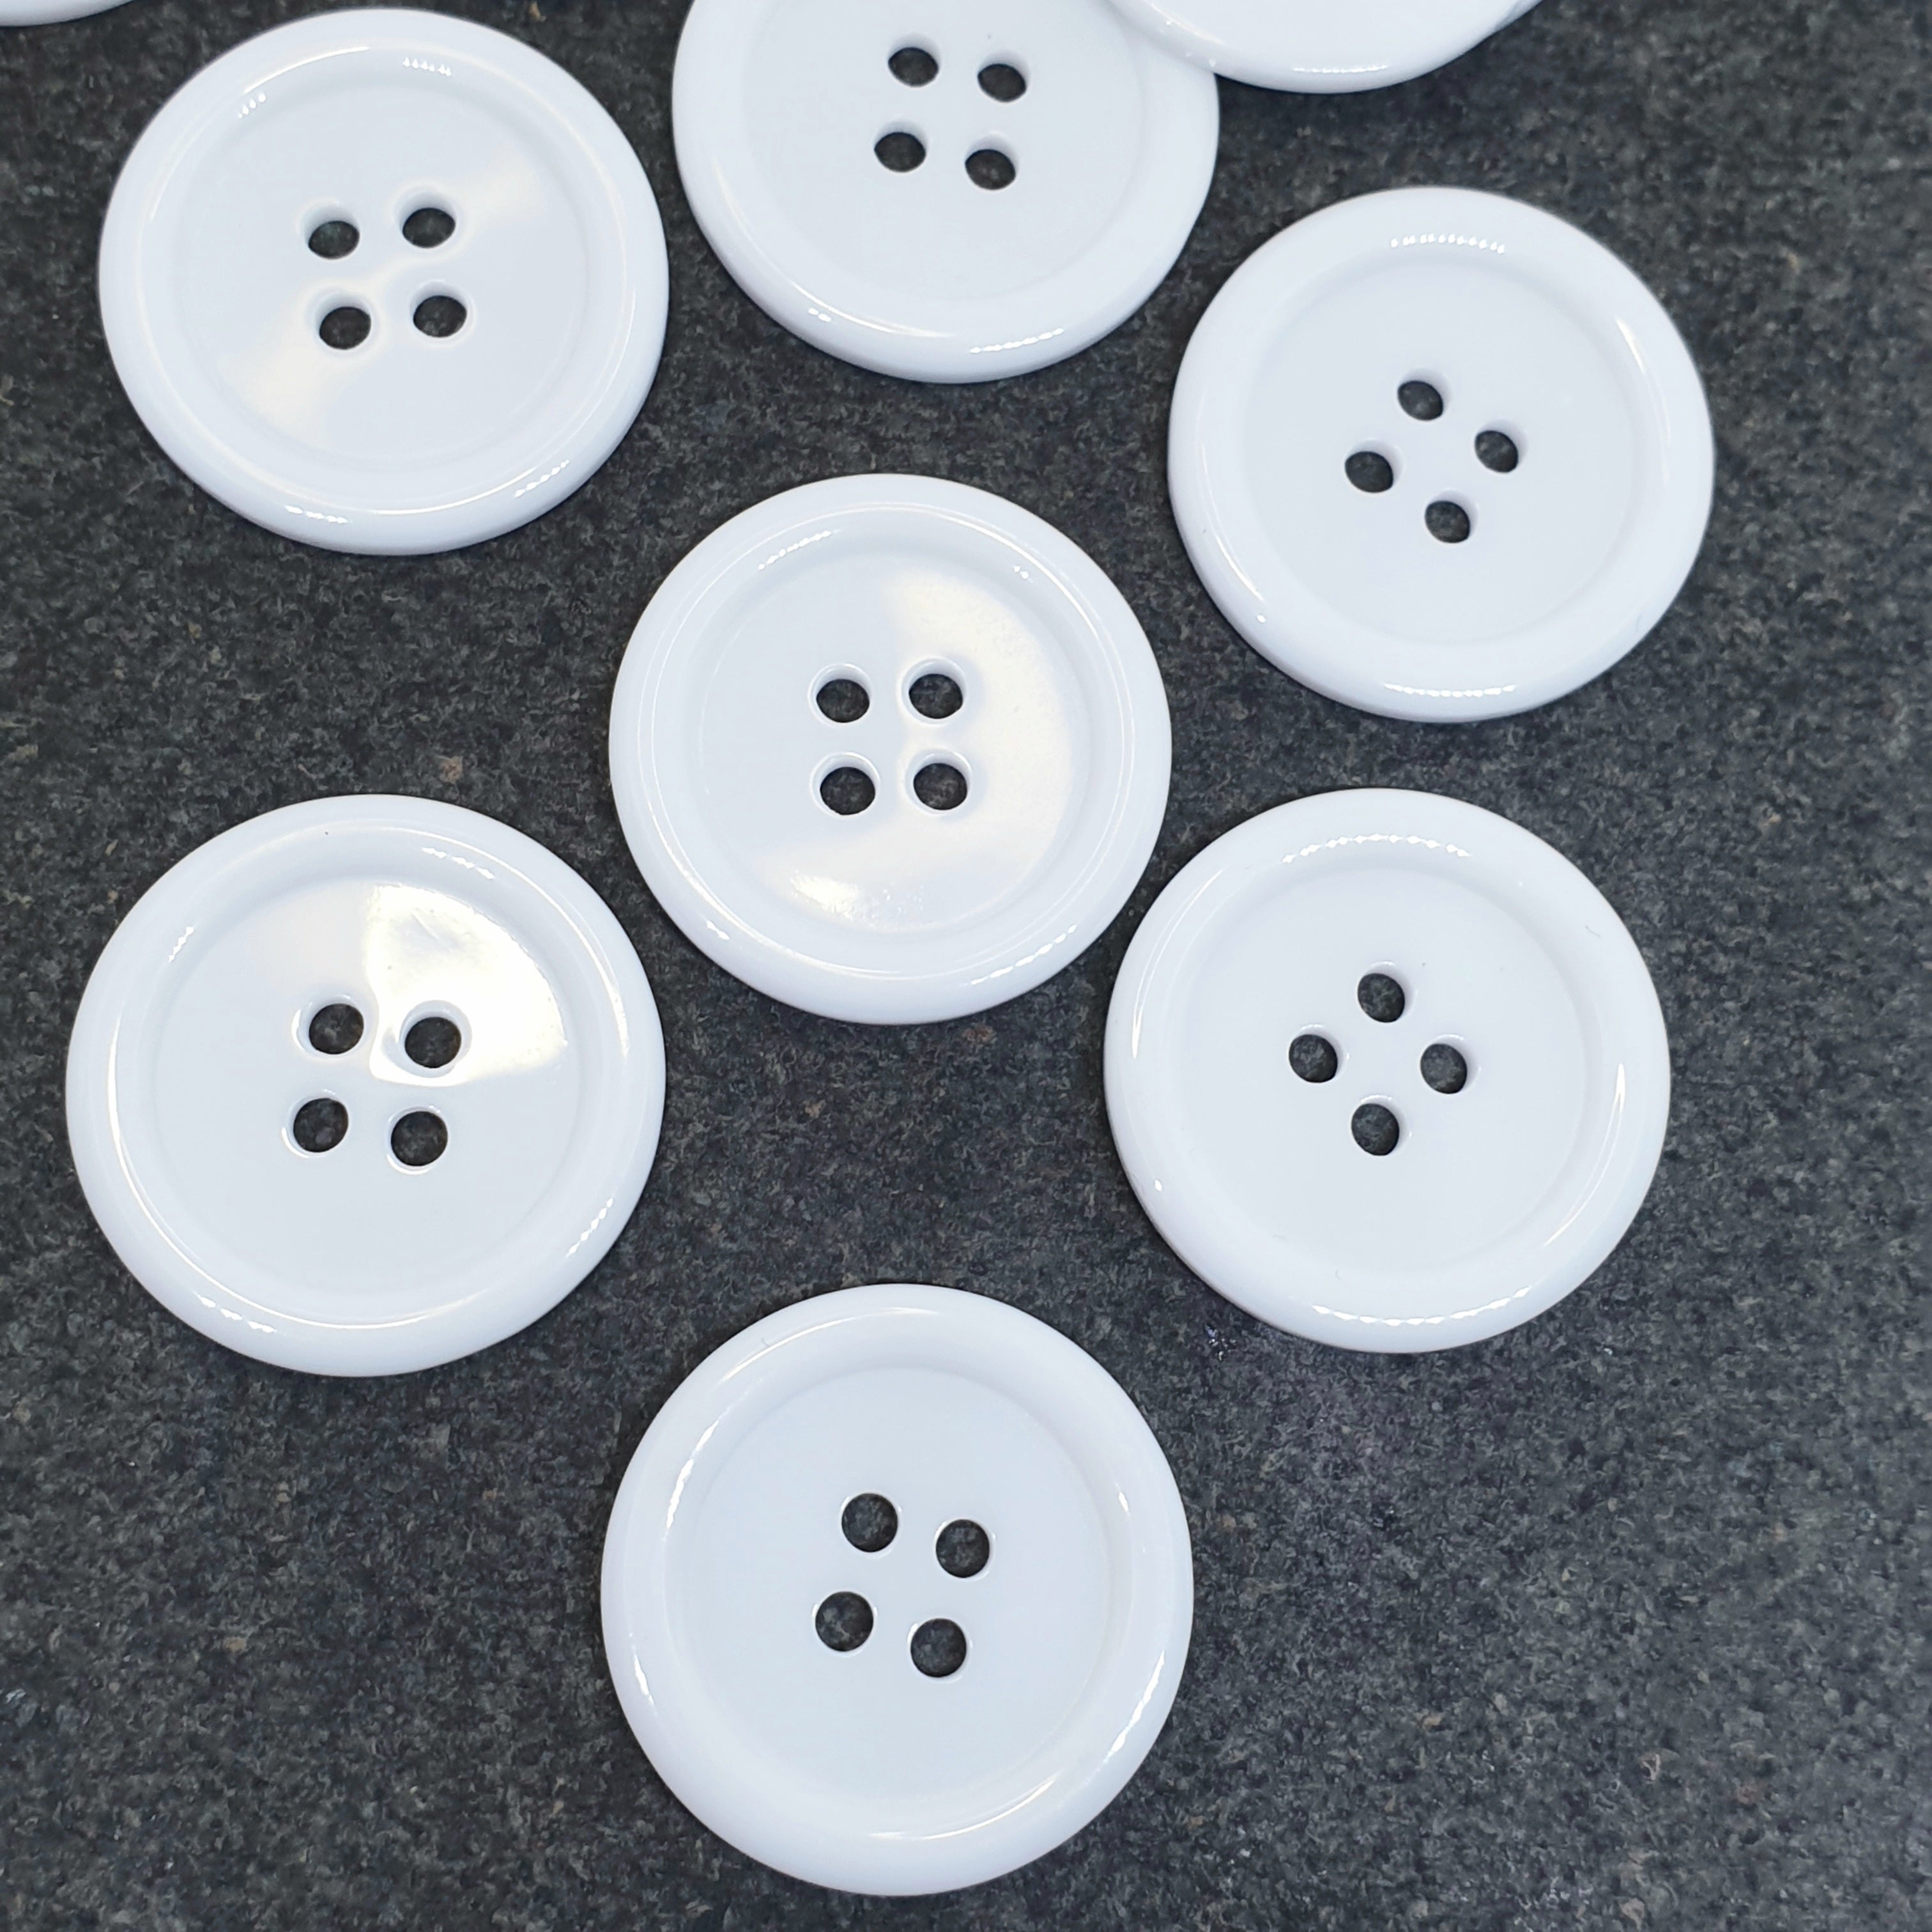 MajorCrafts 24pcs 25mm White 4 Holes Round Large Resin Sewing Buttons